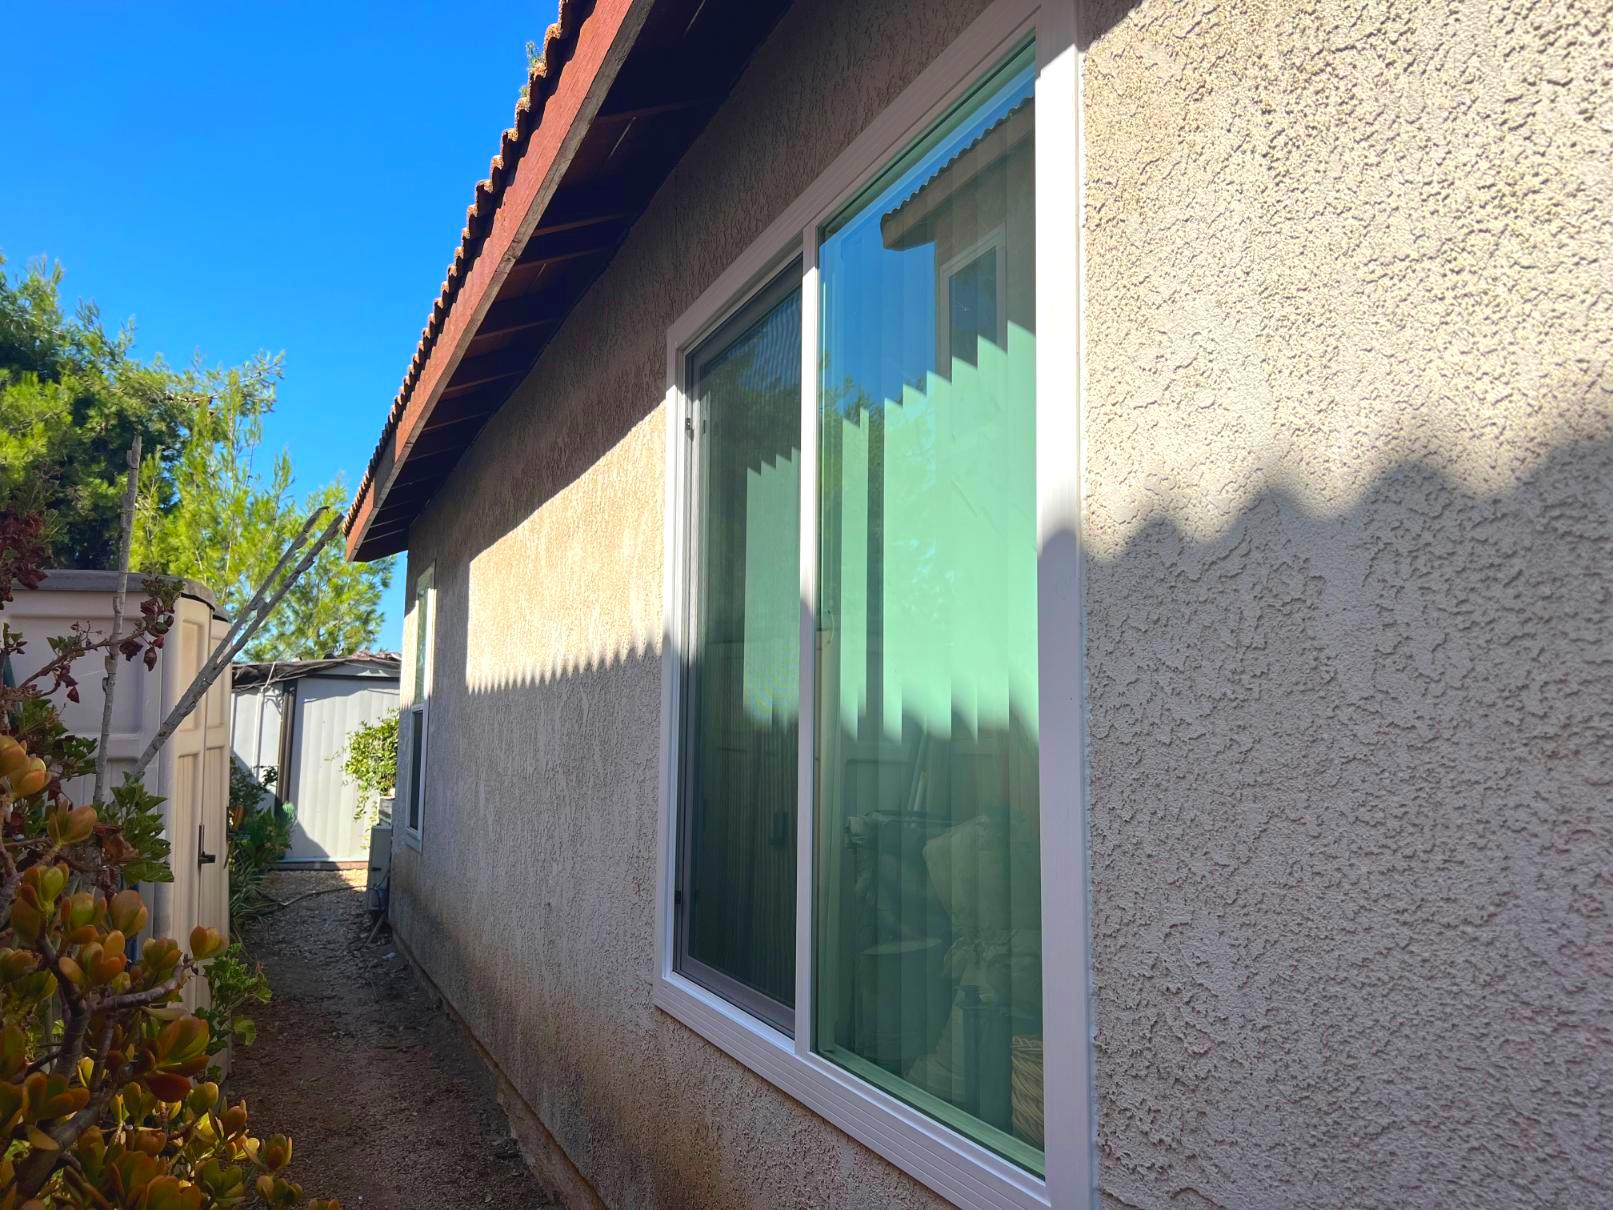 Window Replacement in Moreno Valley, CA